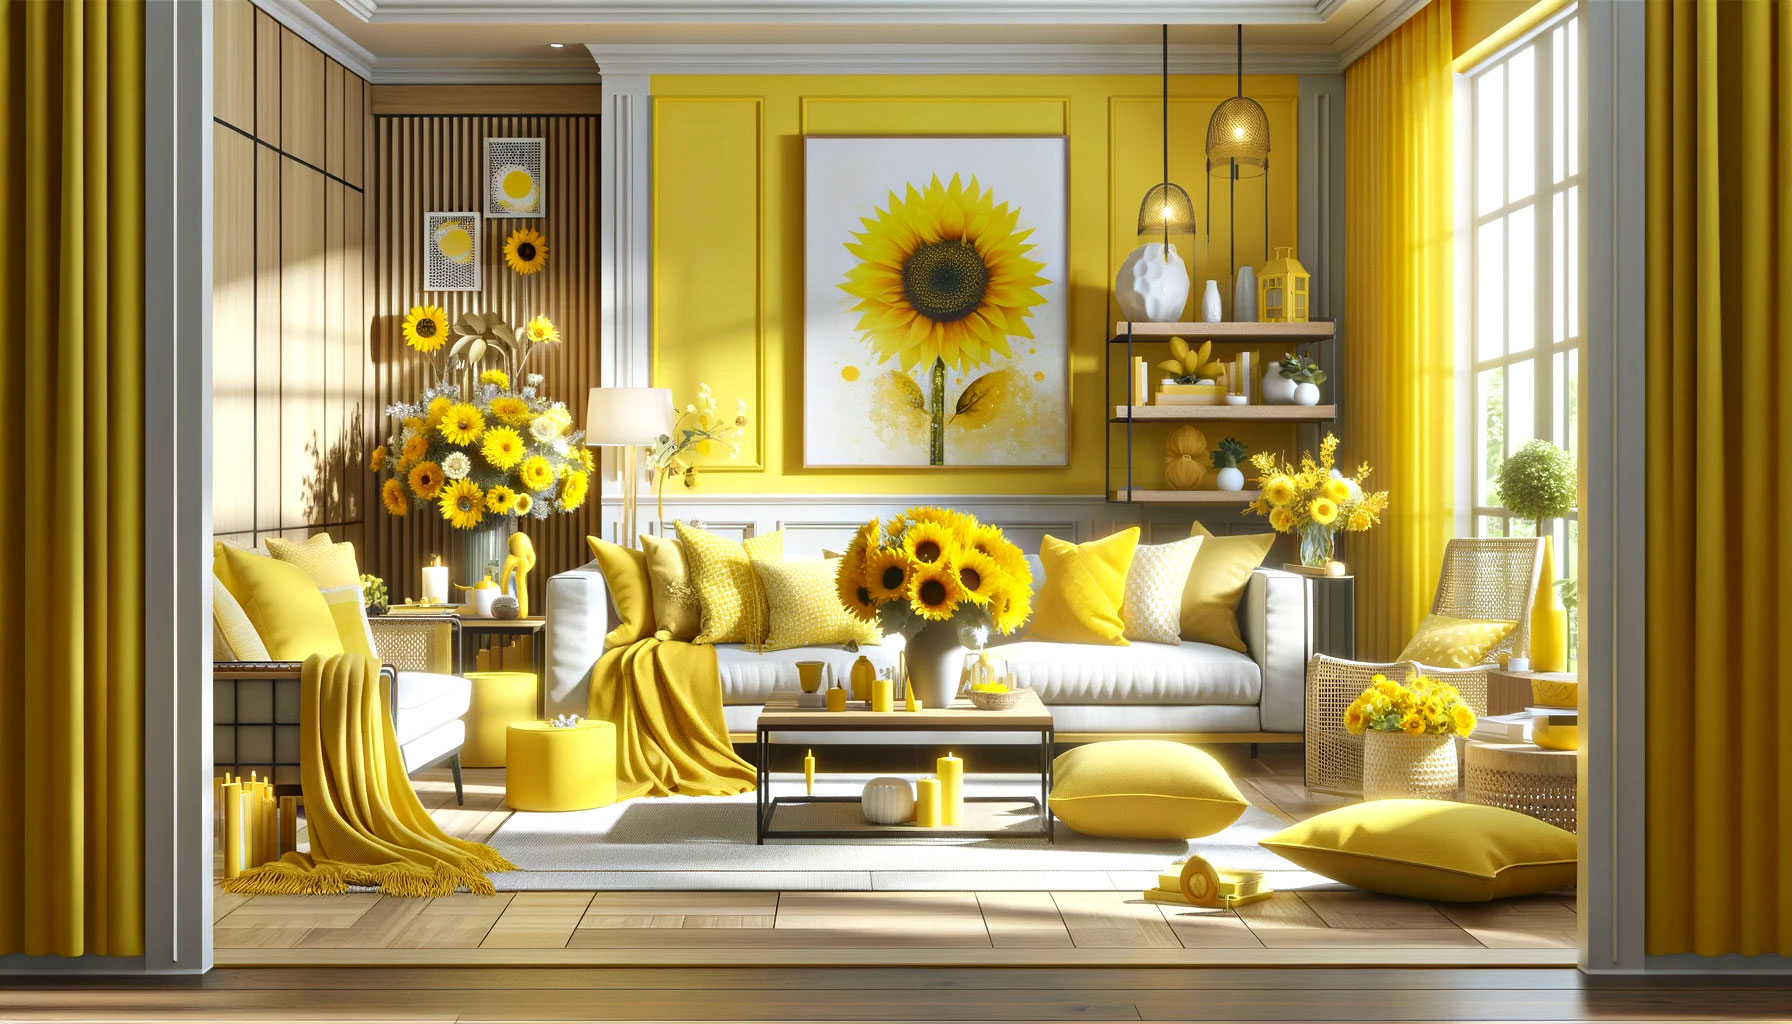 The Colour Psychology of Yellow in Interior Design